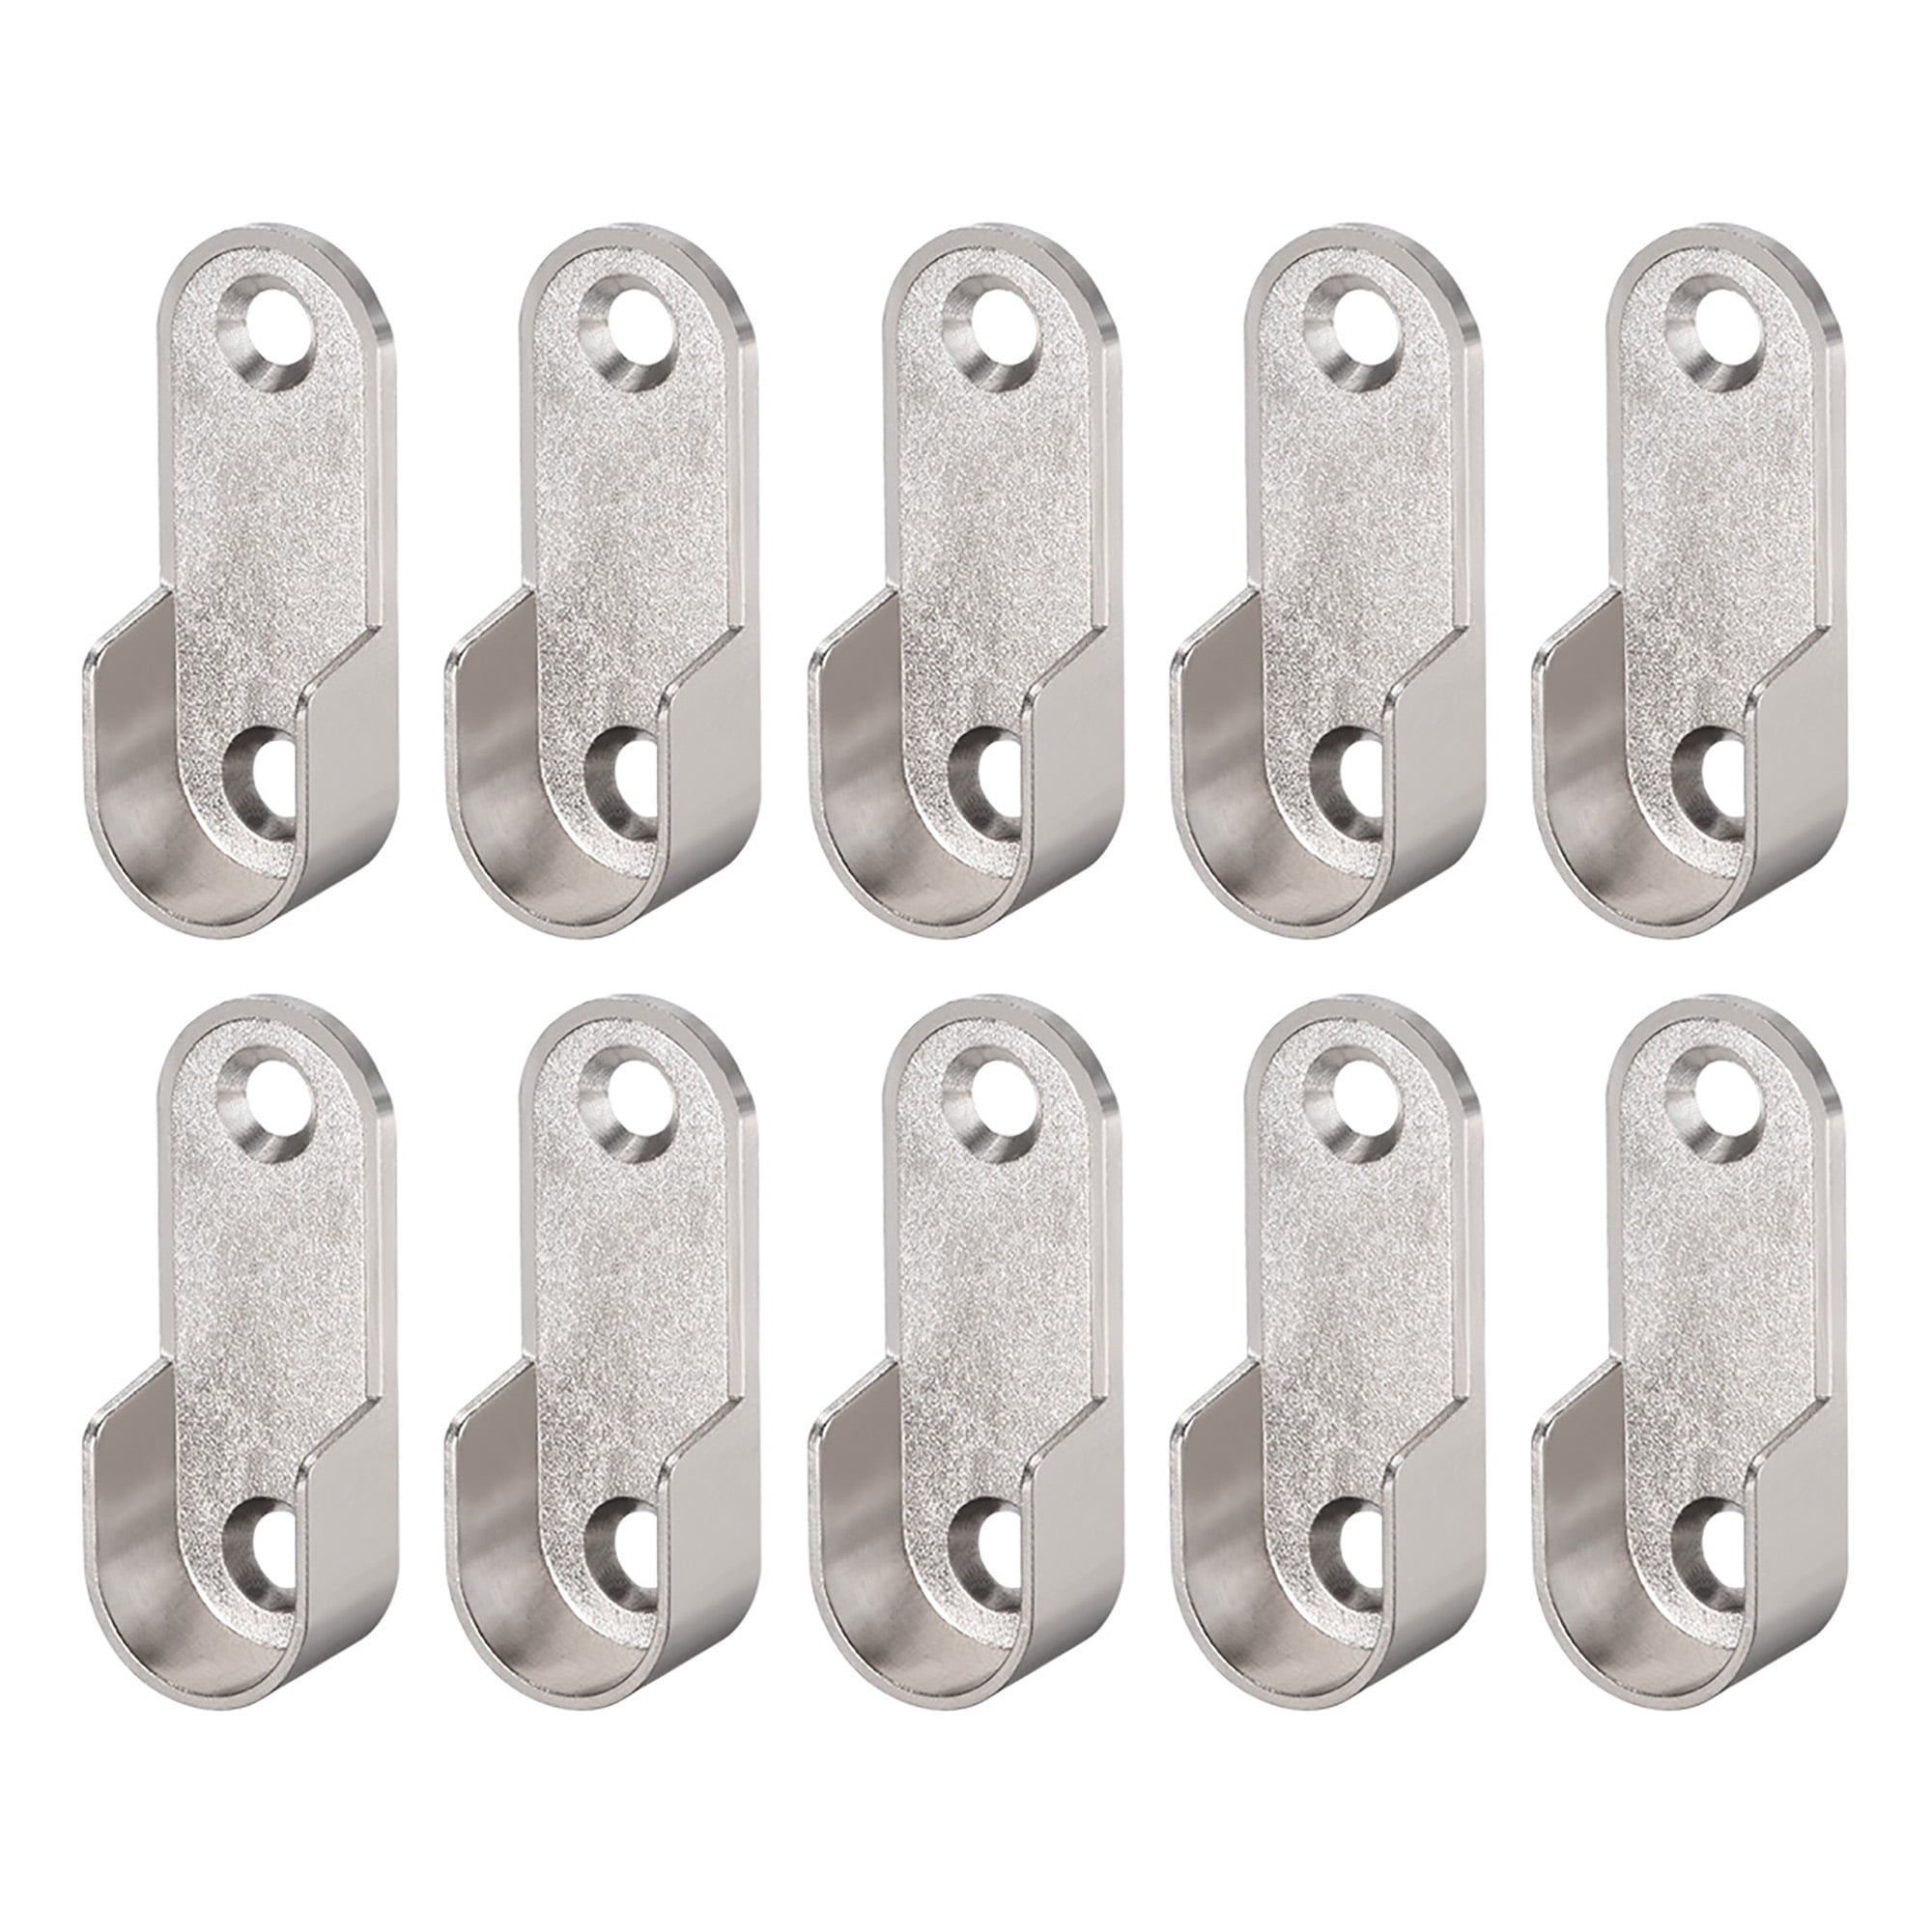 Oval Closet Rod End Supports Wardrobe Rod Flange Support Fit Rod Dia 16mm 4 Pack 